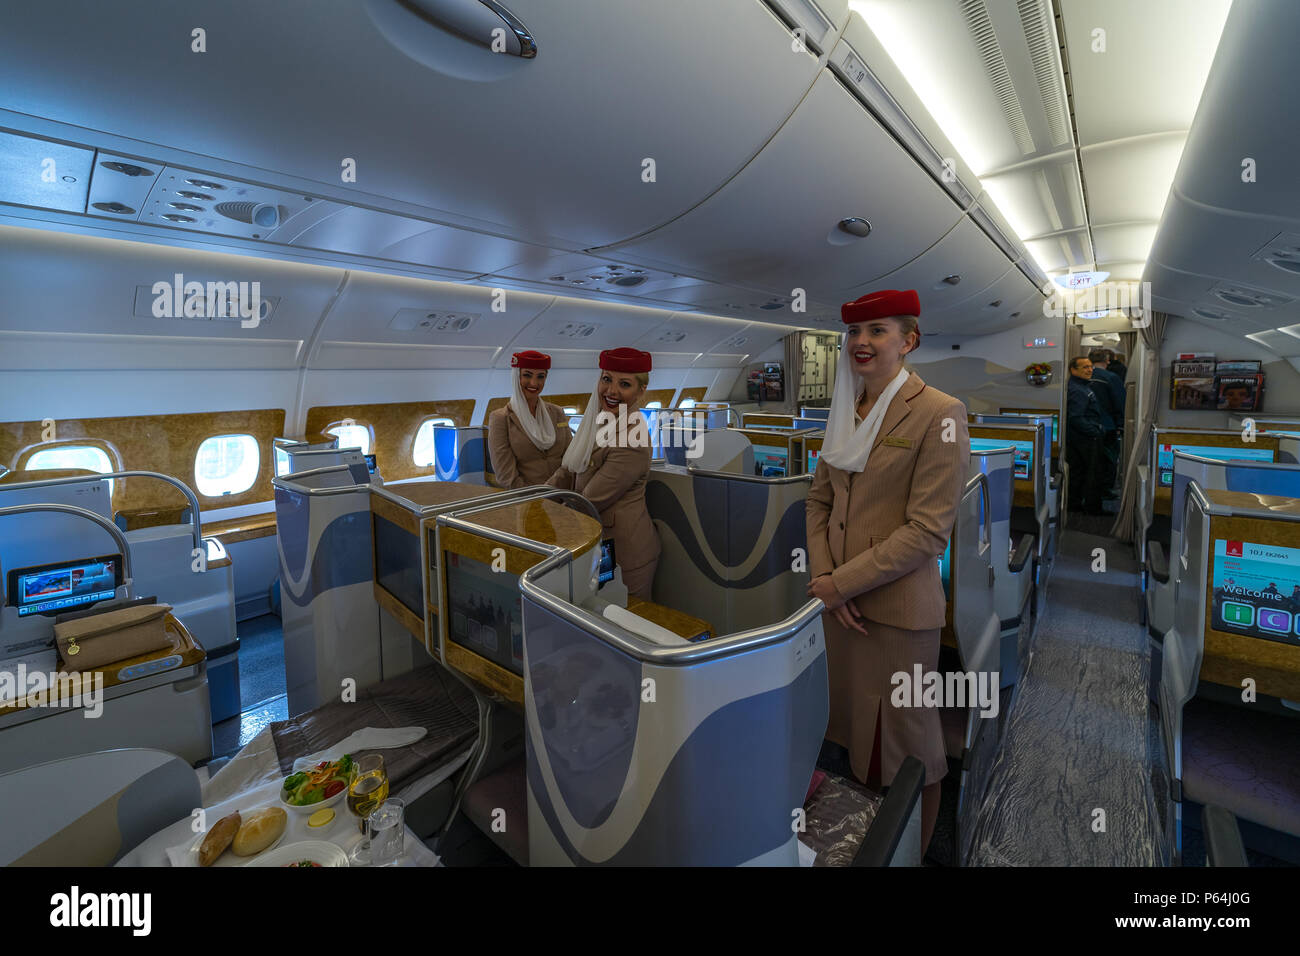 Berlin April 26 2018 Interior Of Business Class Of The